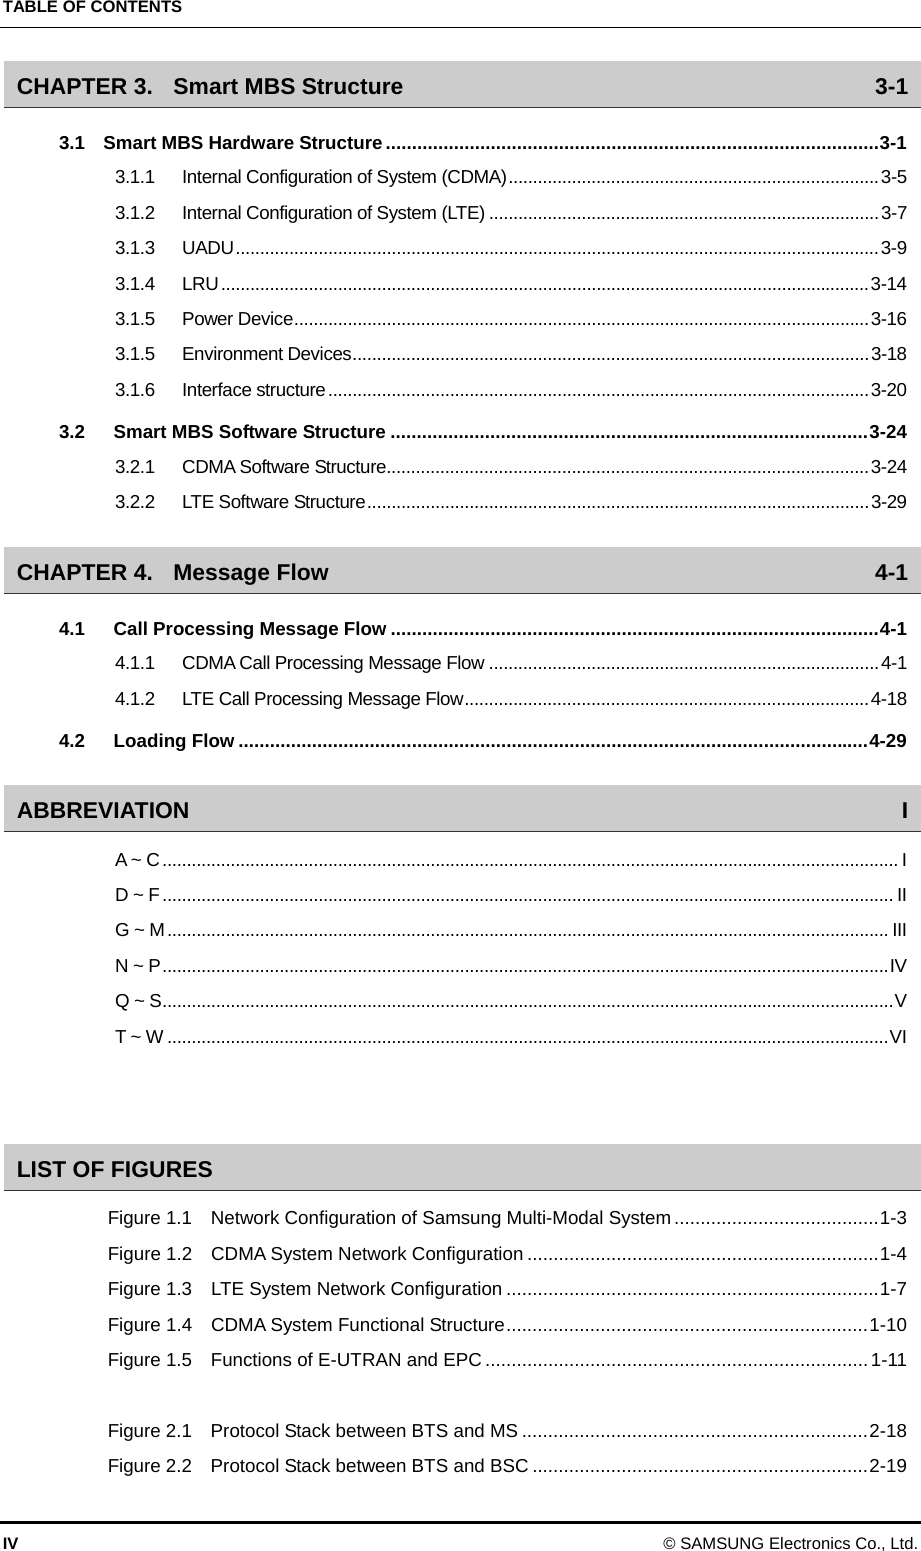 TABLE OF CONTENTS IV © SAMSUNG Electronics Co., Ltd. CHAPTER 3. Smart MBS Structure  3-1 3.1  Smart MBS Hardware Structure..............................................................................................3-1 3.1.1 Internal Configuration of System (CDMA)............................................................................3-5 3.1.2 Internal Configuration of System (LTE) ................................................................................3-7 3.1.3 UADU....................................................................................................................................3-9 3.1.4 LRU.....................................................................................................................................3-14 3.1.5 Power Device......................................................................................................................3-16 3.1.5 Environment Devices..........................................................................................................3-18 3.1.6 Interface structure...............................................................................................................3-20 3.2 Smart MBS Software Structure ...........................................................................................3-24 3.2.1 CDMA Software Structure...................................................................................................3-24 3.2.2 LTE Software Structure.......................................................................................................3-29 CHAPTER 4. Message Flow  4-1 4.1 Call Processing Message Flow .............................................................................................4-1 4.1.1 CDMA Call Processing Message Flow ................................................................................4-1 4.1.2 LTE Call Processing Message Flow...................................................................................4-18 4.2 Loading Flow ........................................................................................................................4-29 ABBREVIATION I A ~ C....................................................................................................................................................... I D ~ F...................................................................................................................................................... II G ~ M.................................................................................................................................................... III N ~ P.....................................................................................................................................................IV Q ~ S......................................................................................................................................................V T ~ W ....................................................................................................................................................VI   LIST OF FIGURES Figure 1.1    Network Configuration of Samsung Multi-Modal System.......................................1-3 Figure 1.2    CDMA System Network Configuration ...................................................................1-4 Figure 1.3    LTE System Network Configuration .......................................................................1-7 Figure 1.4    CDMA System Functional Structure.....................................................................1-10 Figure 1.5  Functions of E-UTRAN and EPC .........................................................................1-11  Figure 2.1  Protocol Stack between BTS and MS ..................................................................2-18 Figure 2.2  Protocol Stack between BTS and BSC ................................................................2-19 